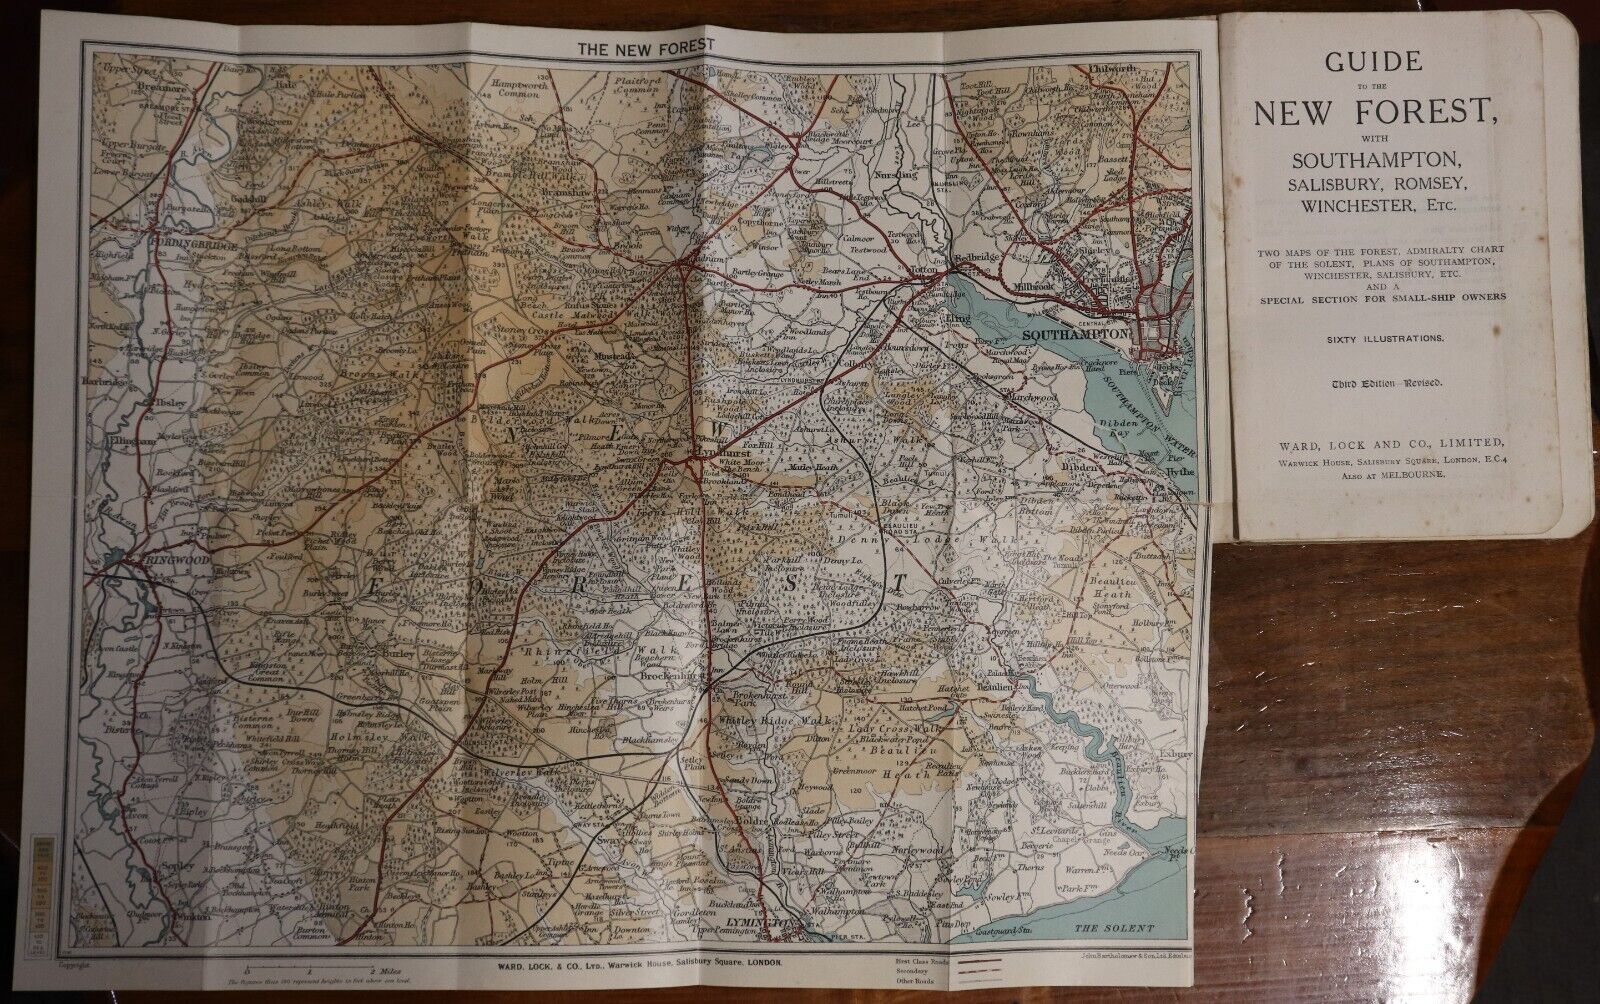 Guide To New Forest: Ward Lock & Co - 1940 - Antique Travel Guide Book w/Maps - 0